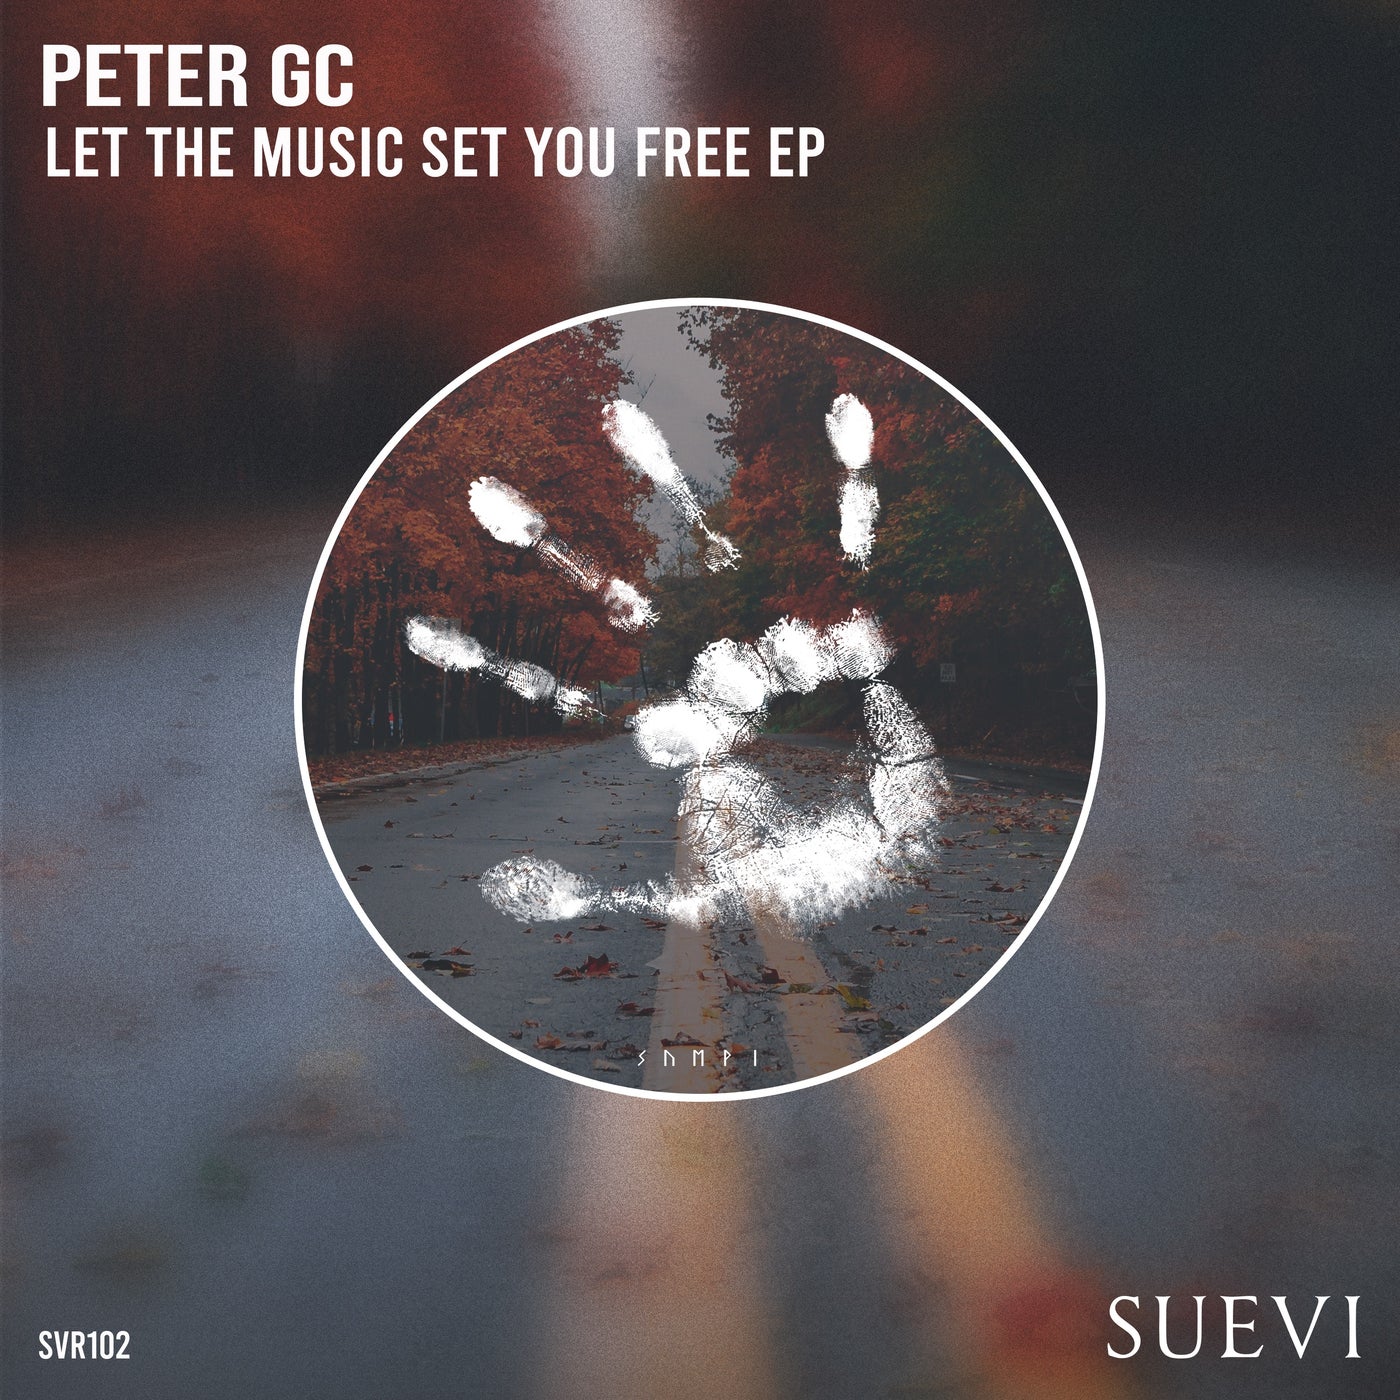 Let The Music Set You Free EP